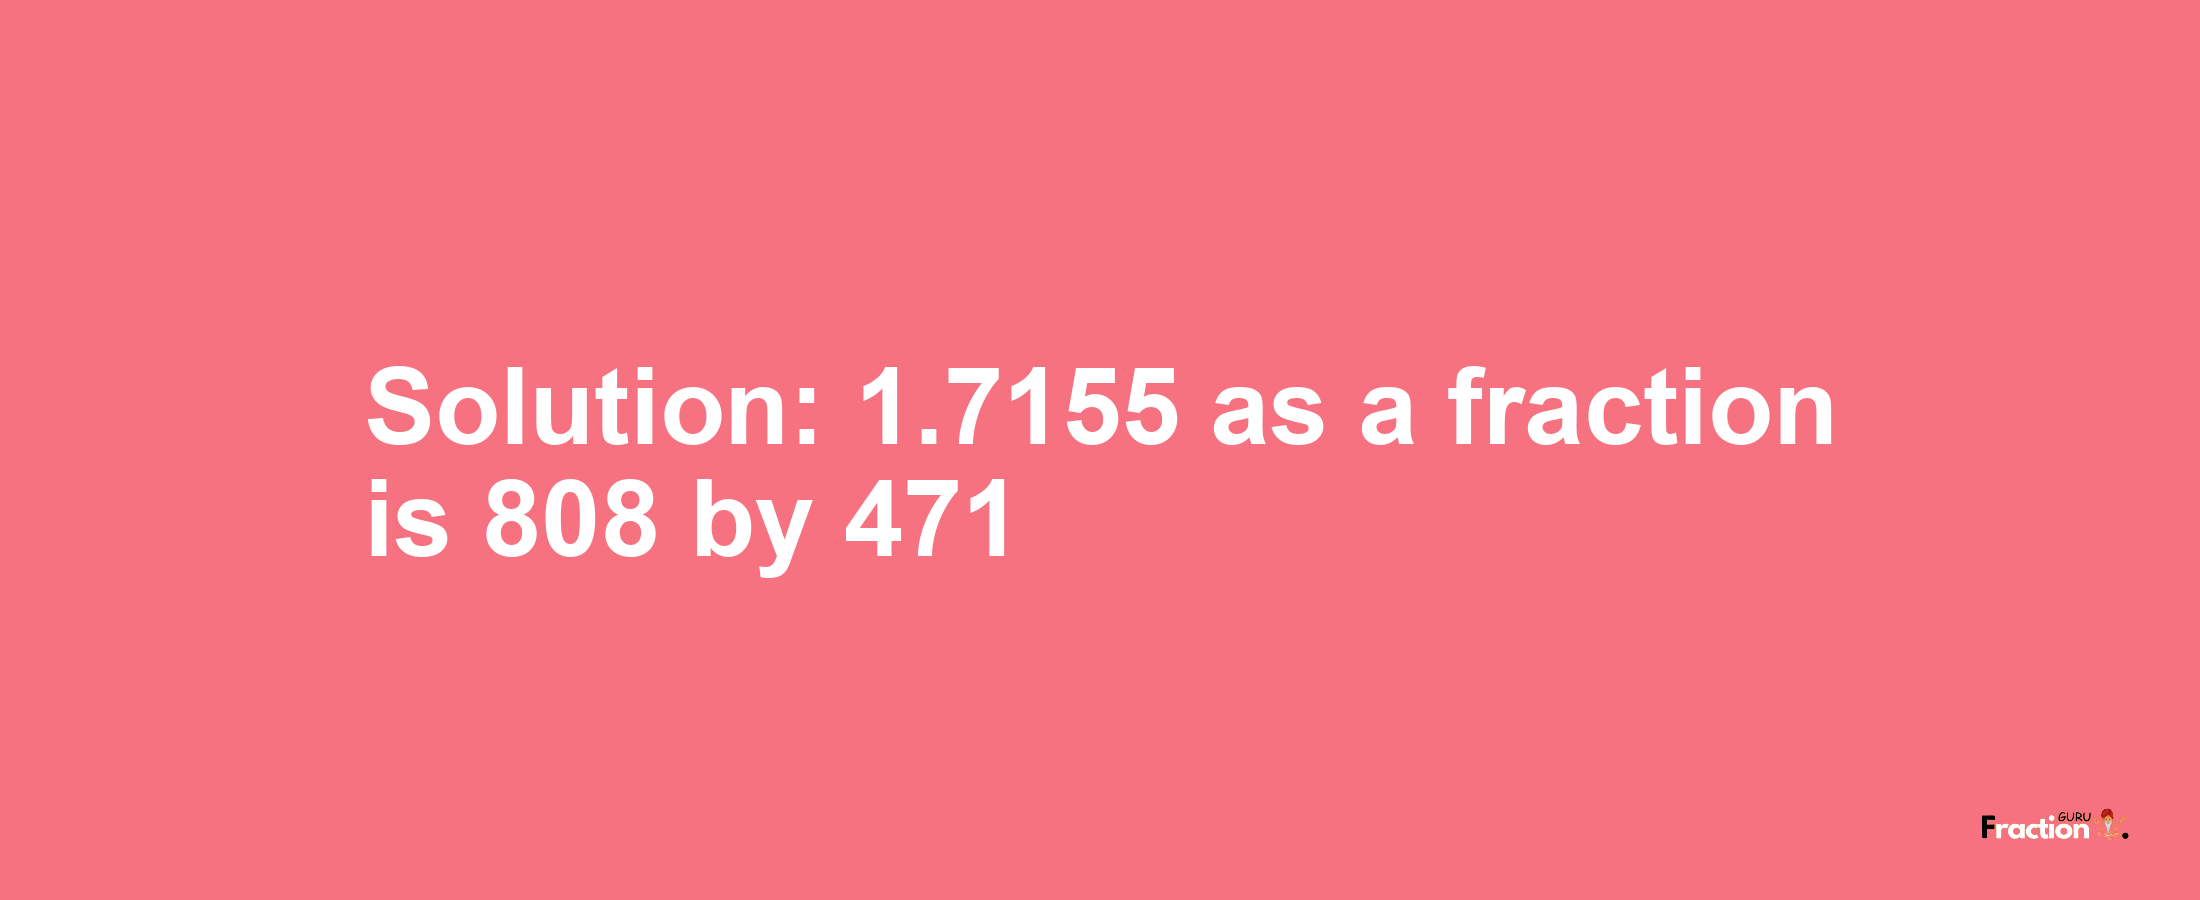 Solution:1.7155 as a fraction is 808/471